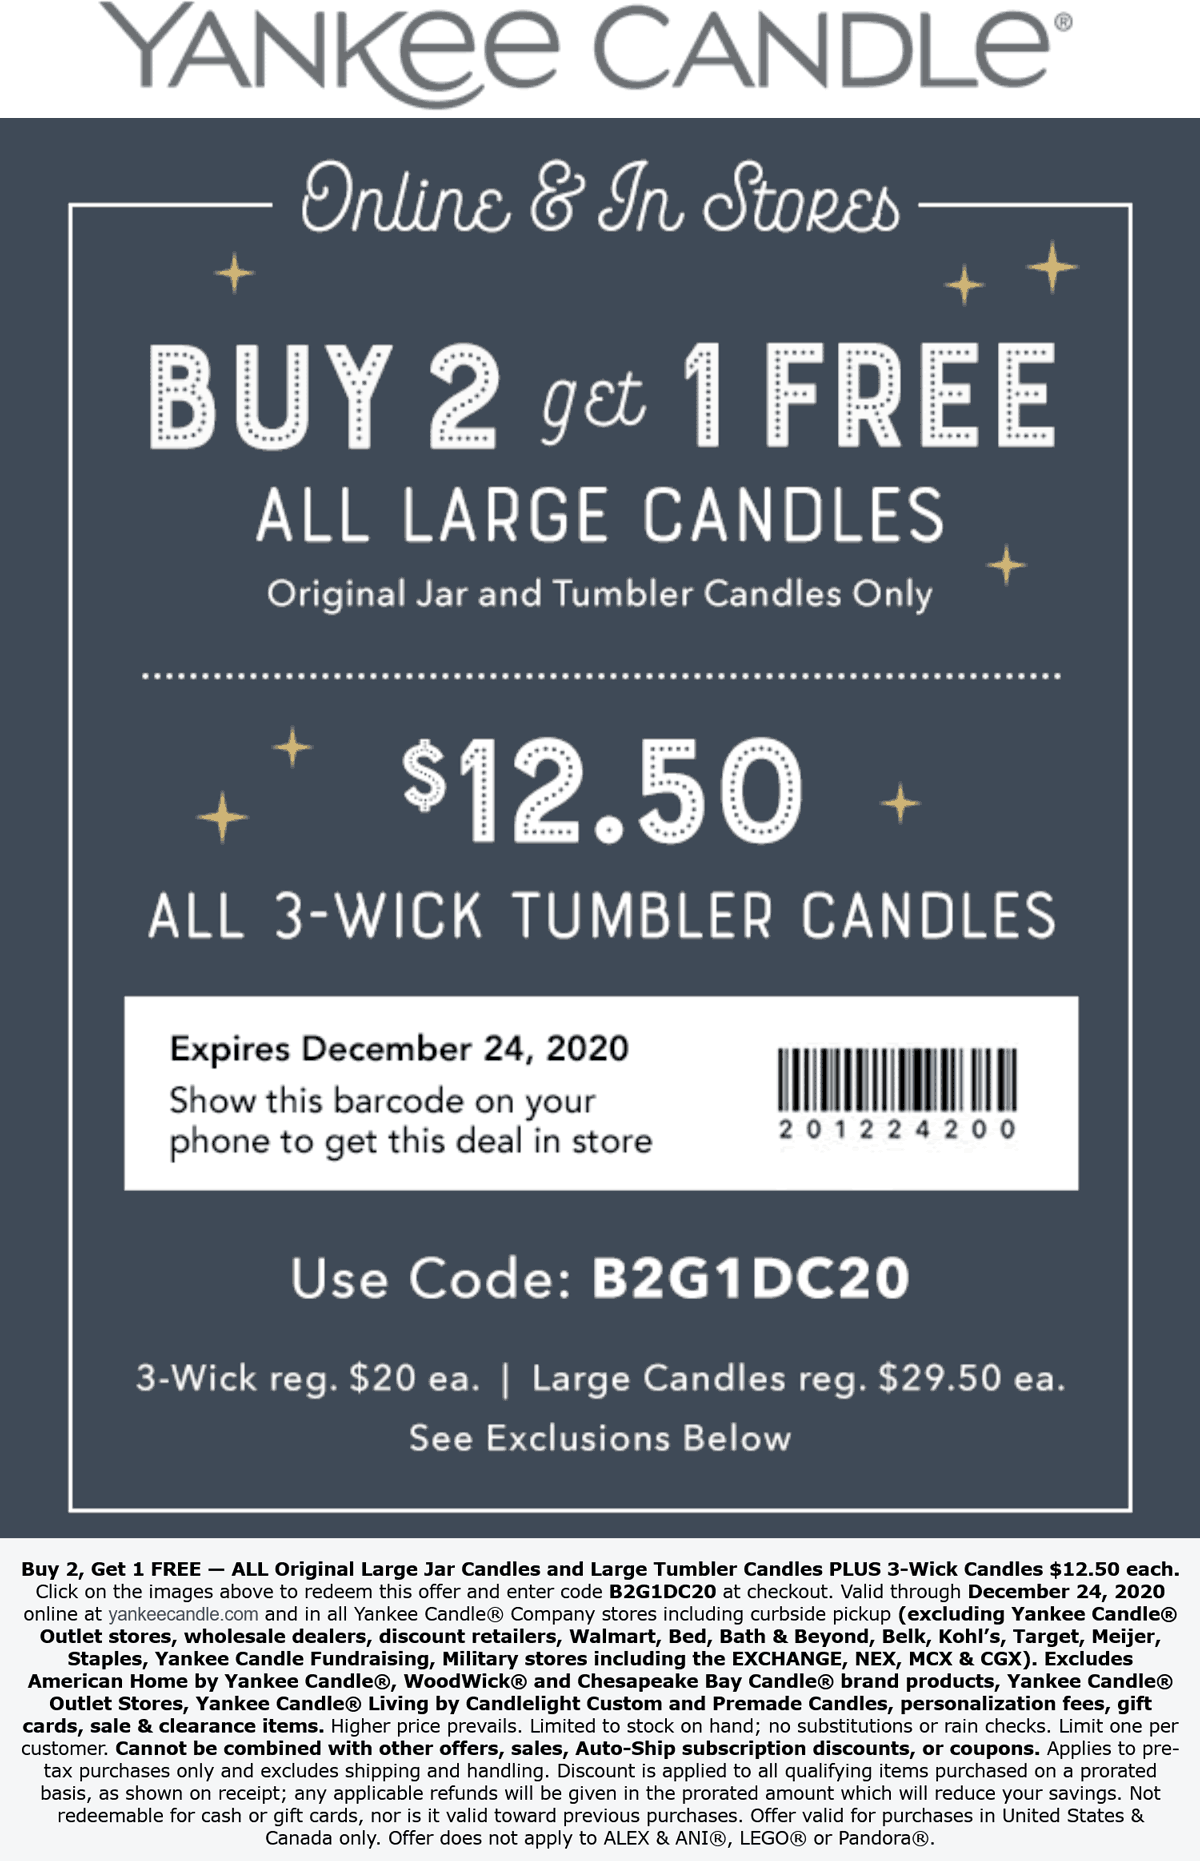 Yankee Candle stores Coupon  3rd candle free at Yankee Candle, or online via promo code B2G1DC20 #yankeecandle 